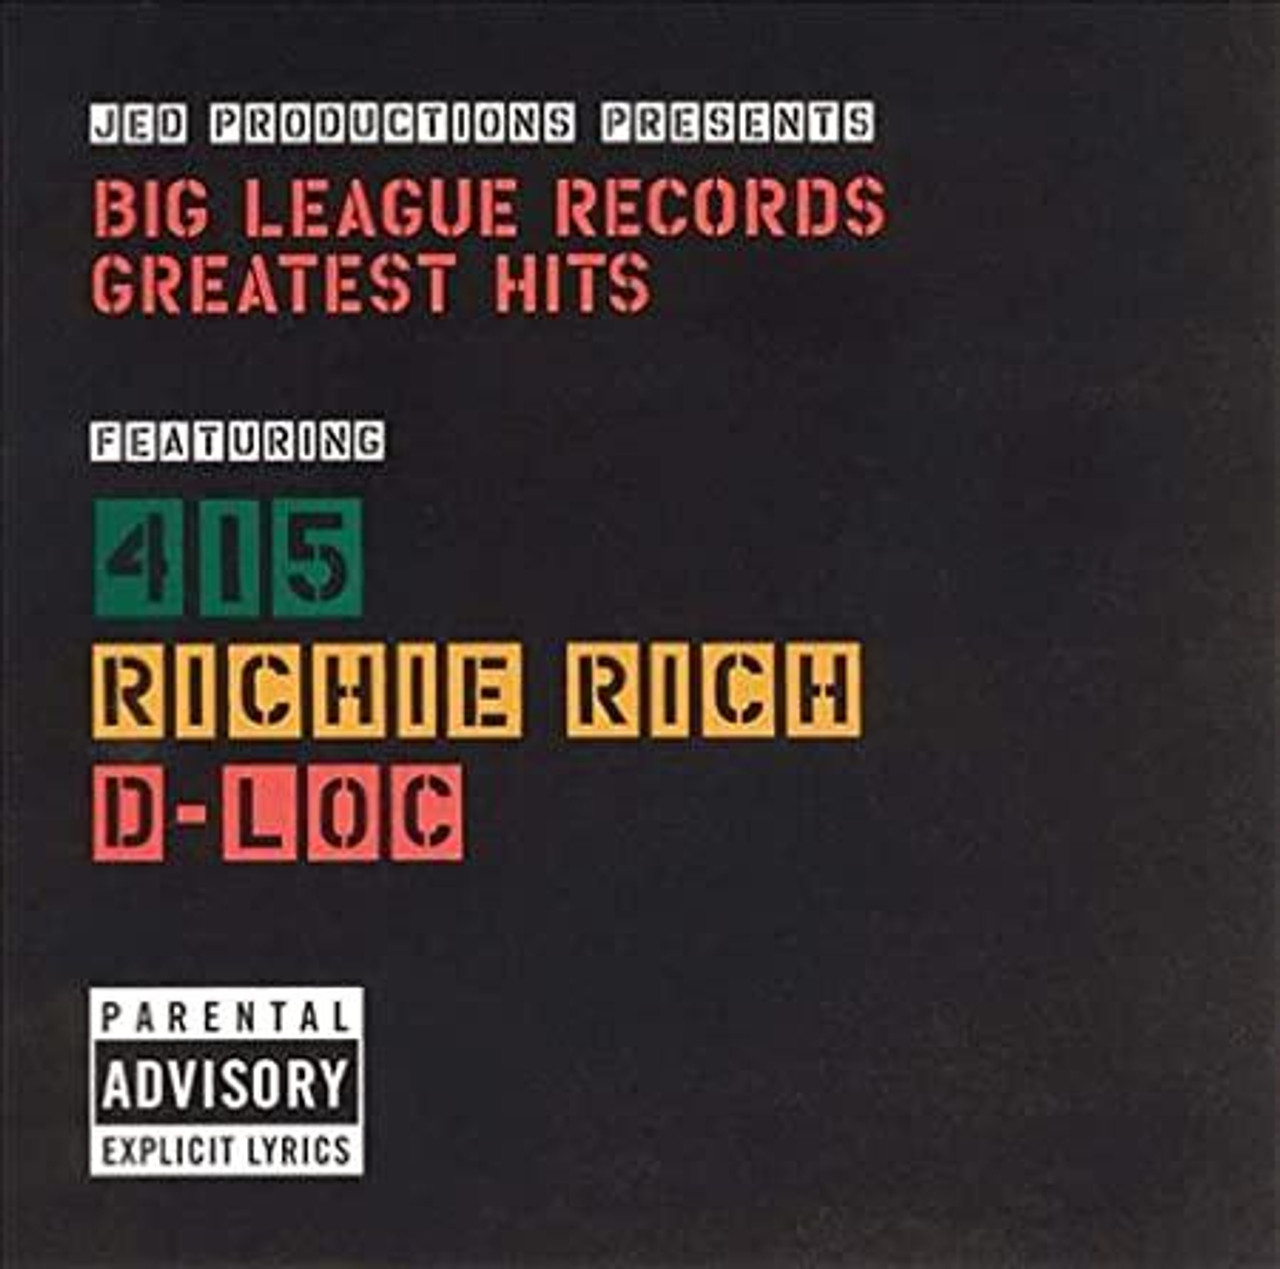 træner Armstrong overfladisk Richie Rich, 415, D-Loc - Big League Records Greatest Hits CD